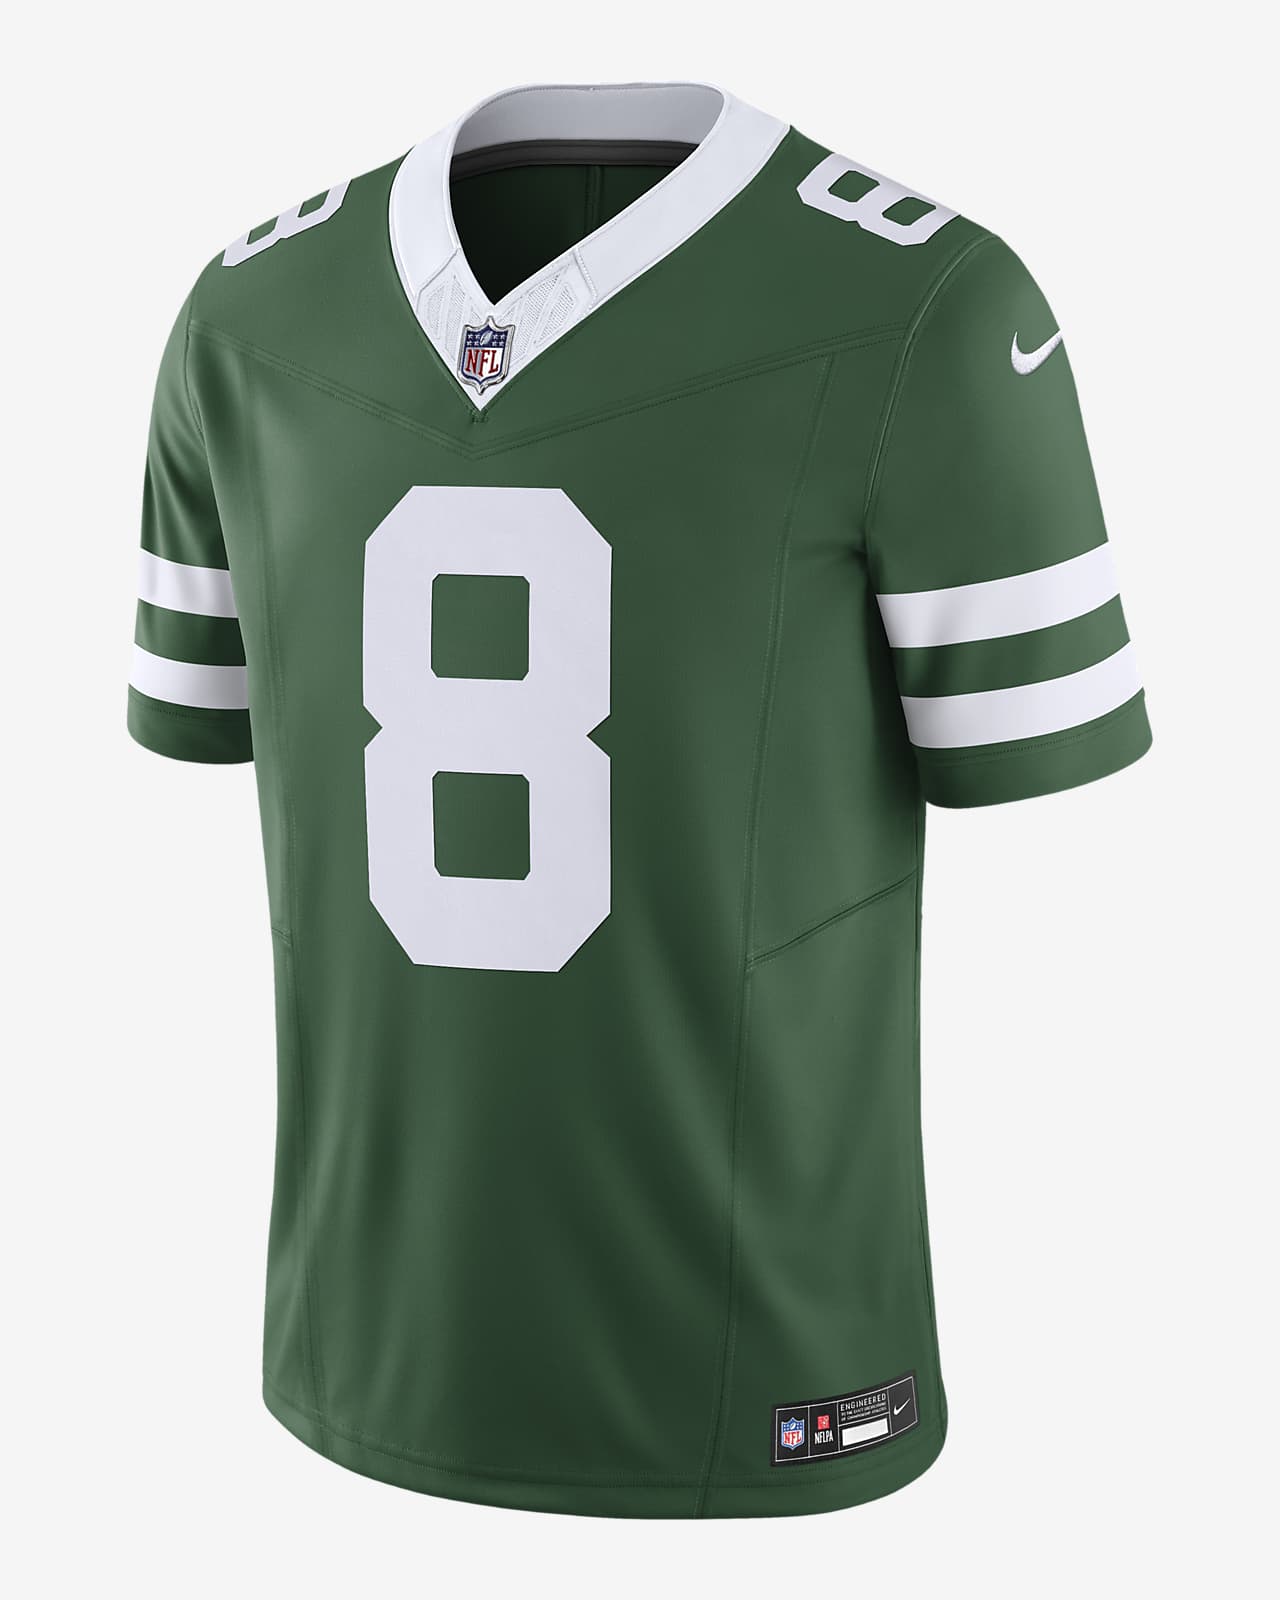 Aaron Rodgers New York Jets Men's Nike Dri-FIT NFL Limited Football Jersey